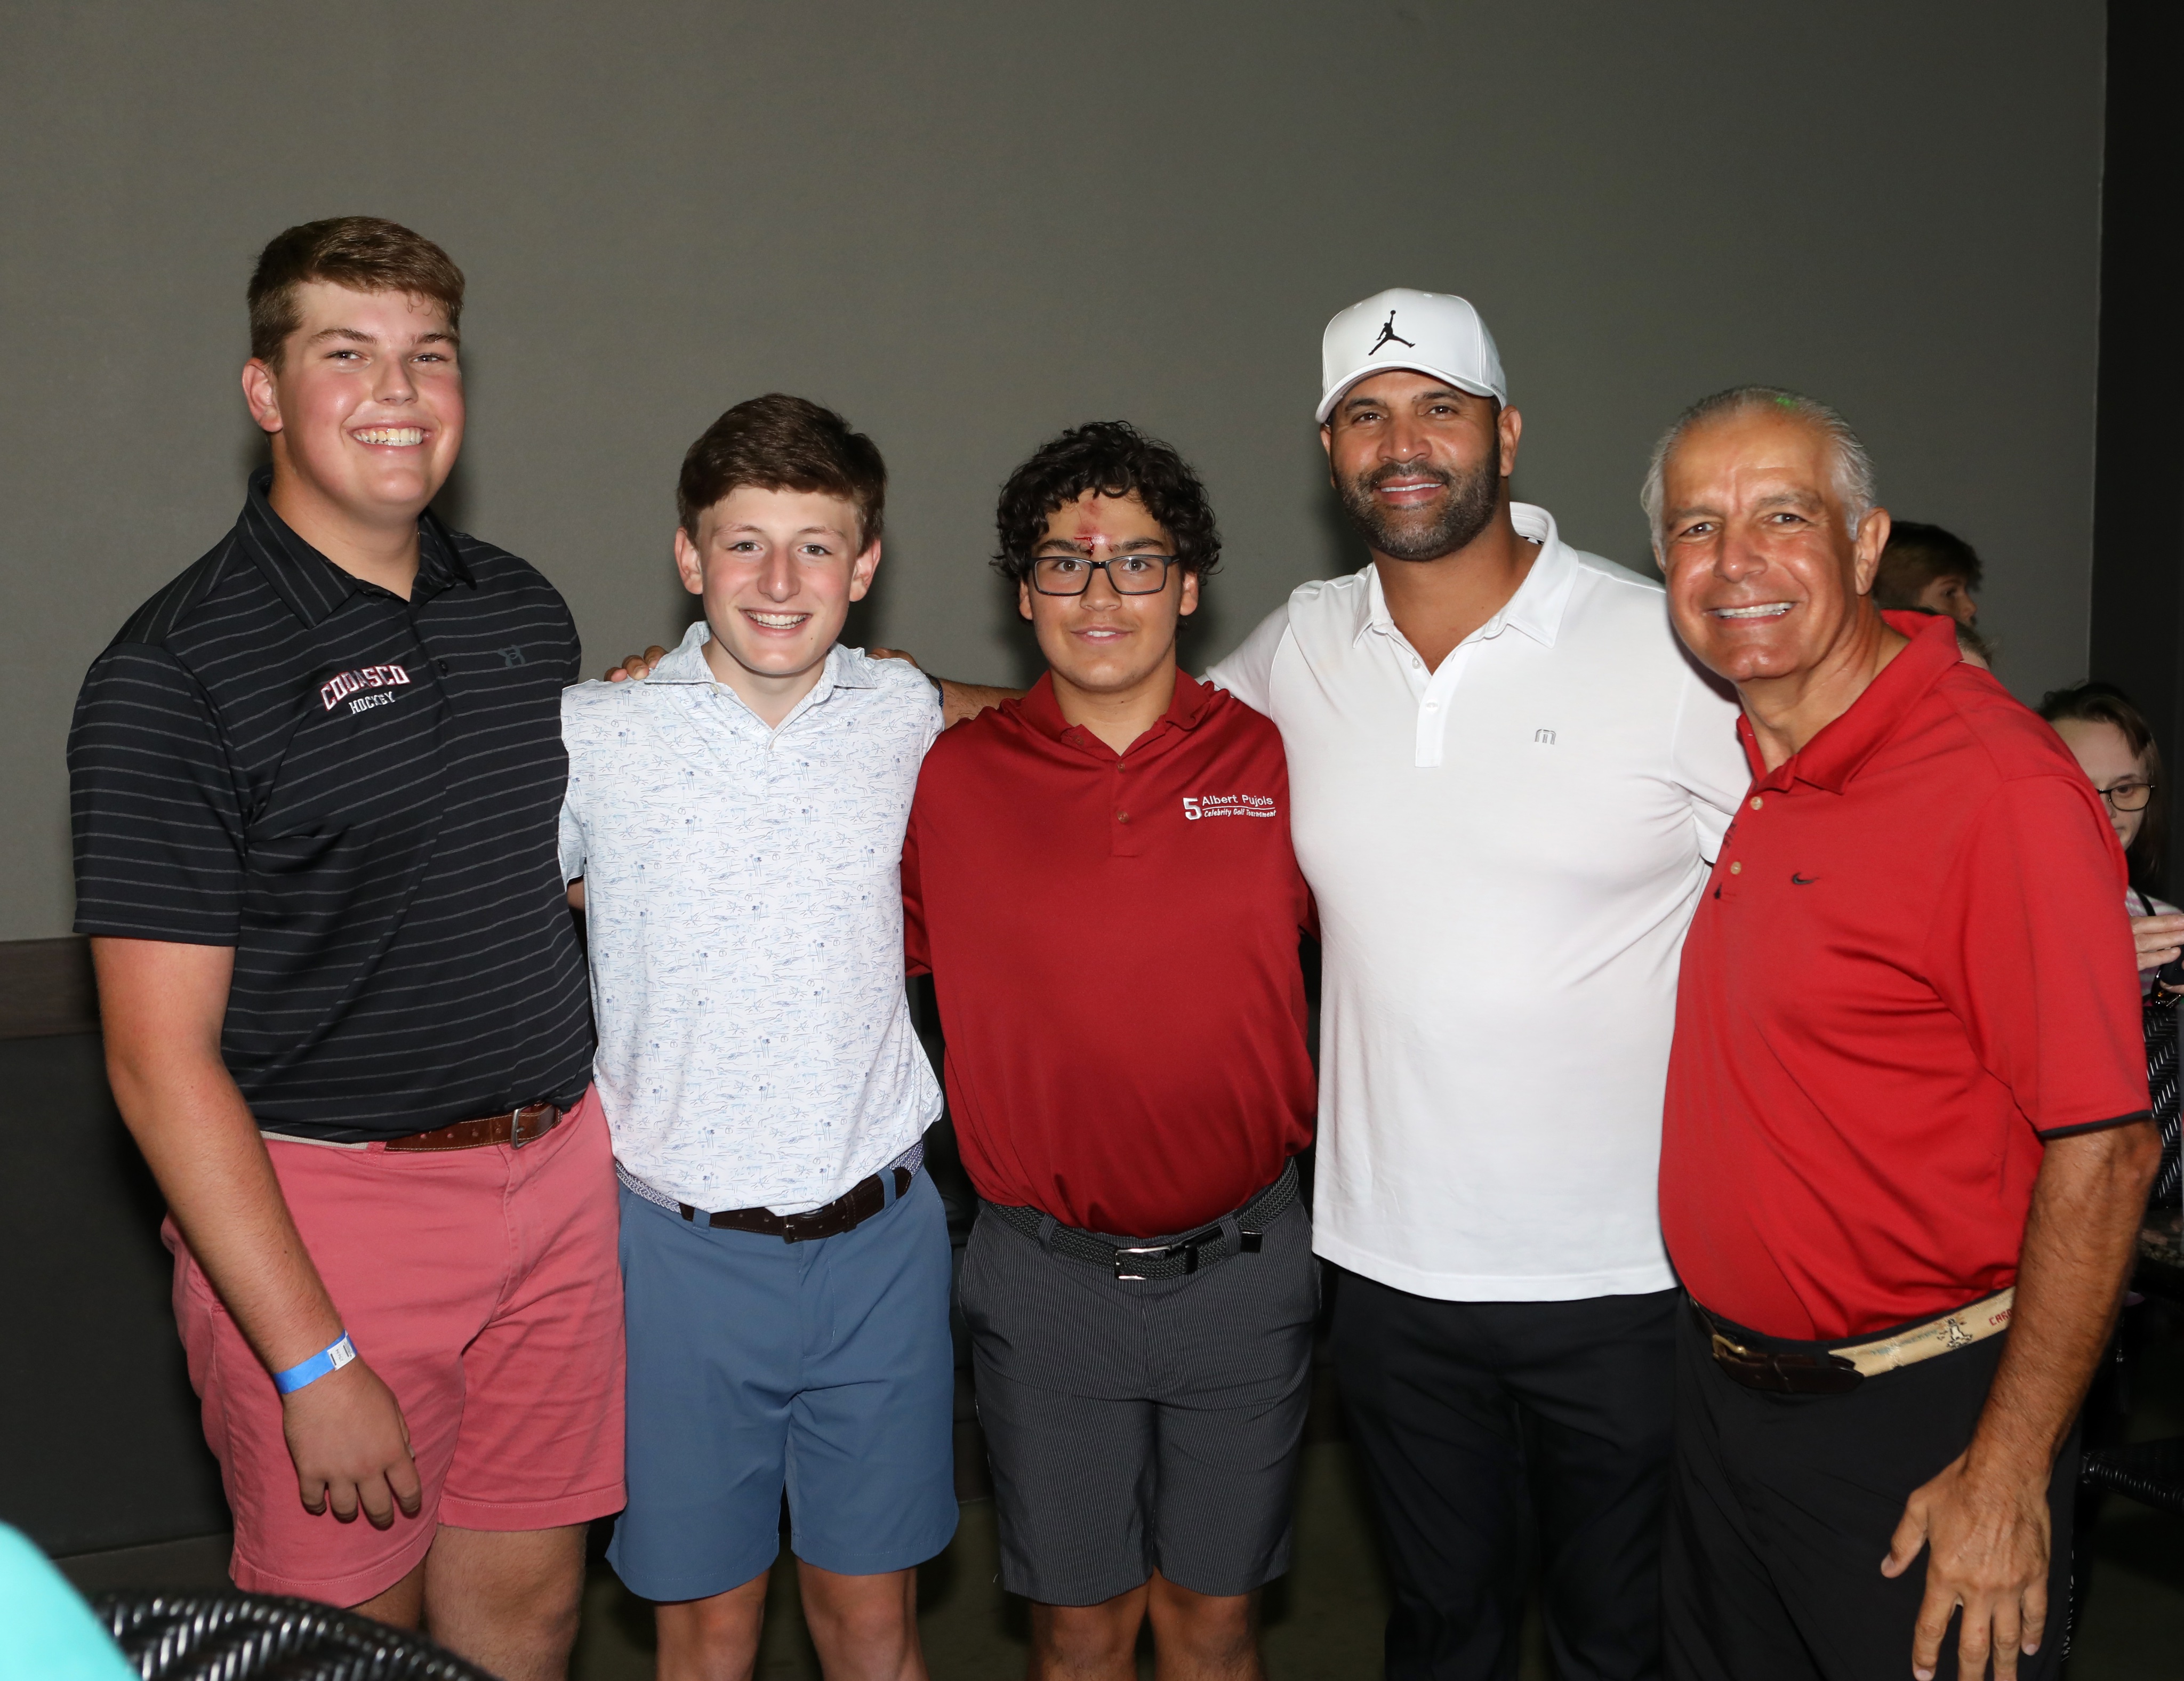 You're invited! The Pujols Family Foundation will host a Charity Dinner for  children and families in need